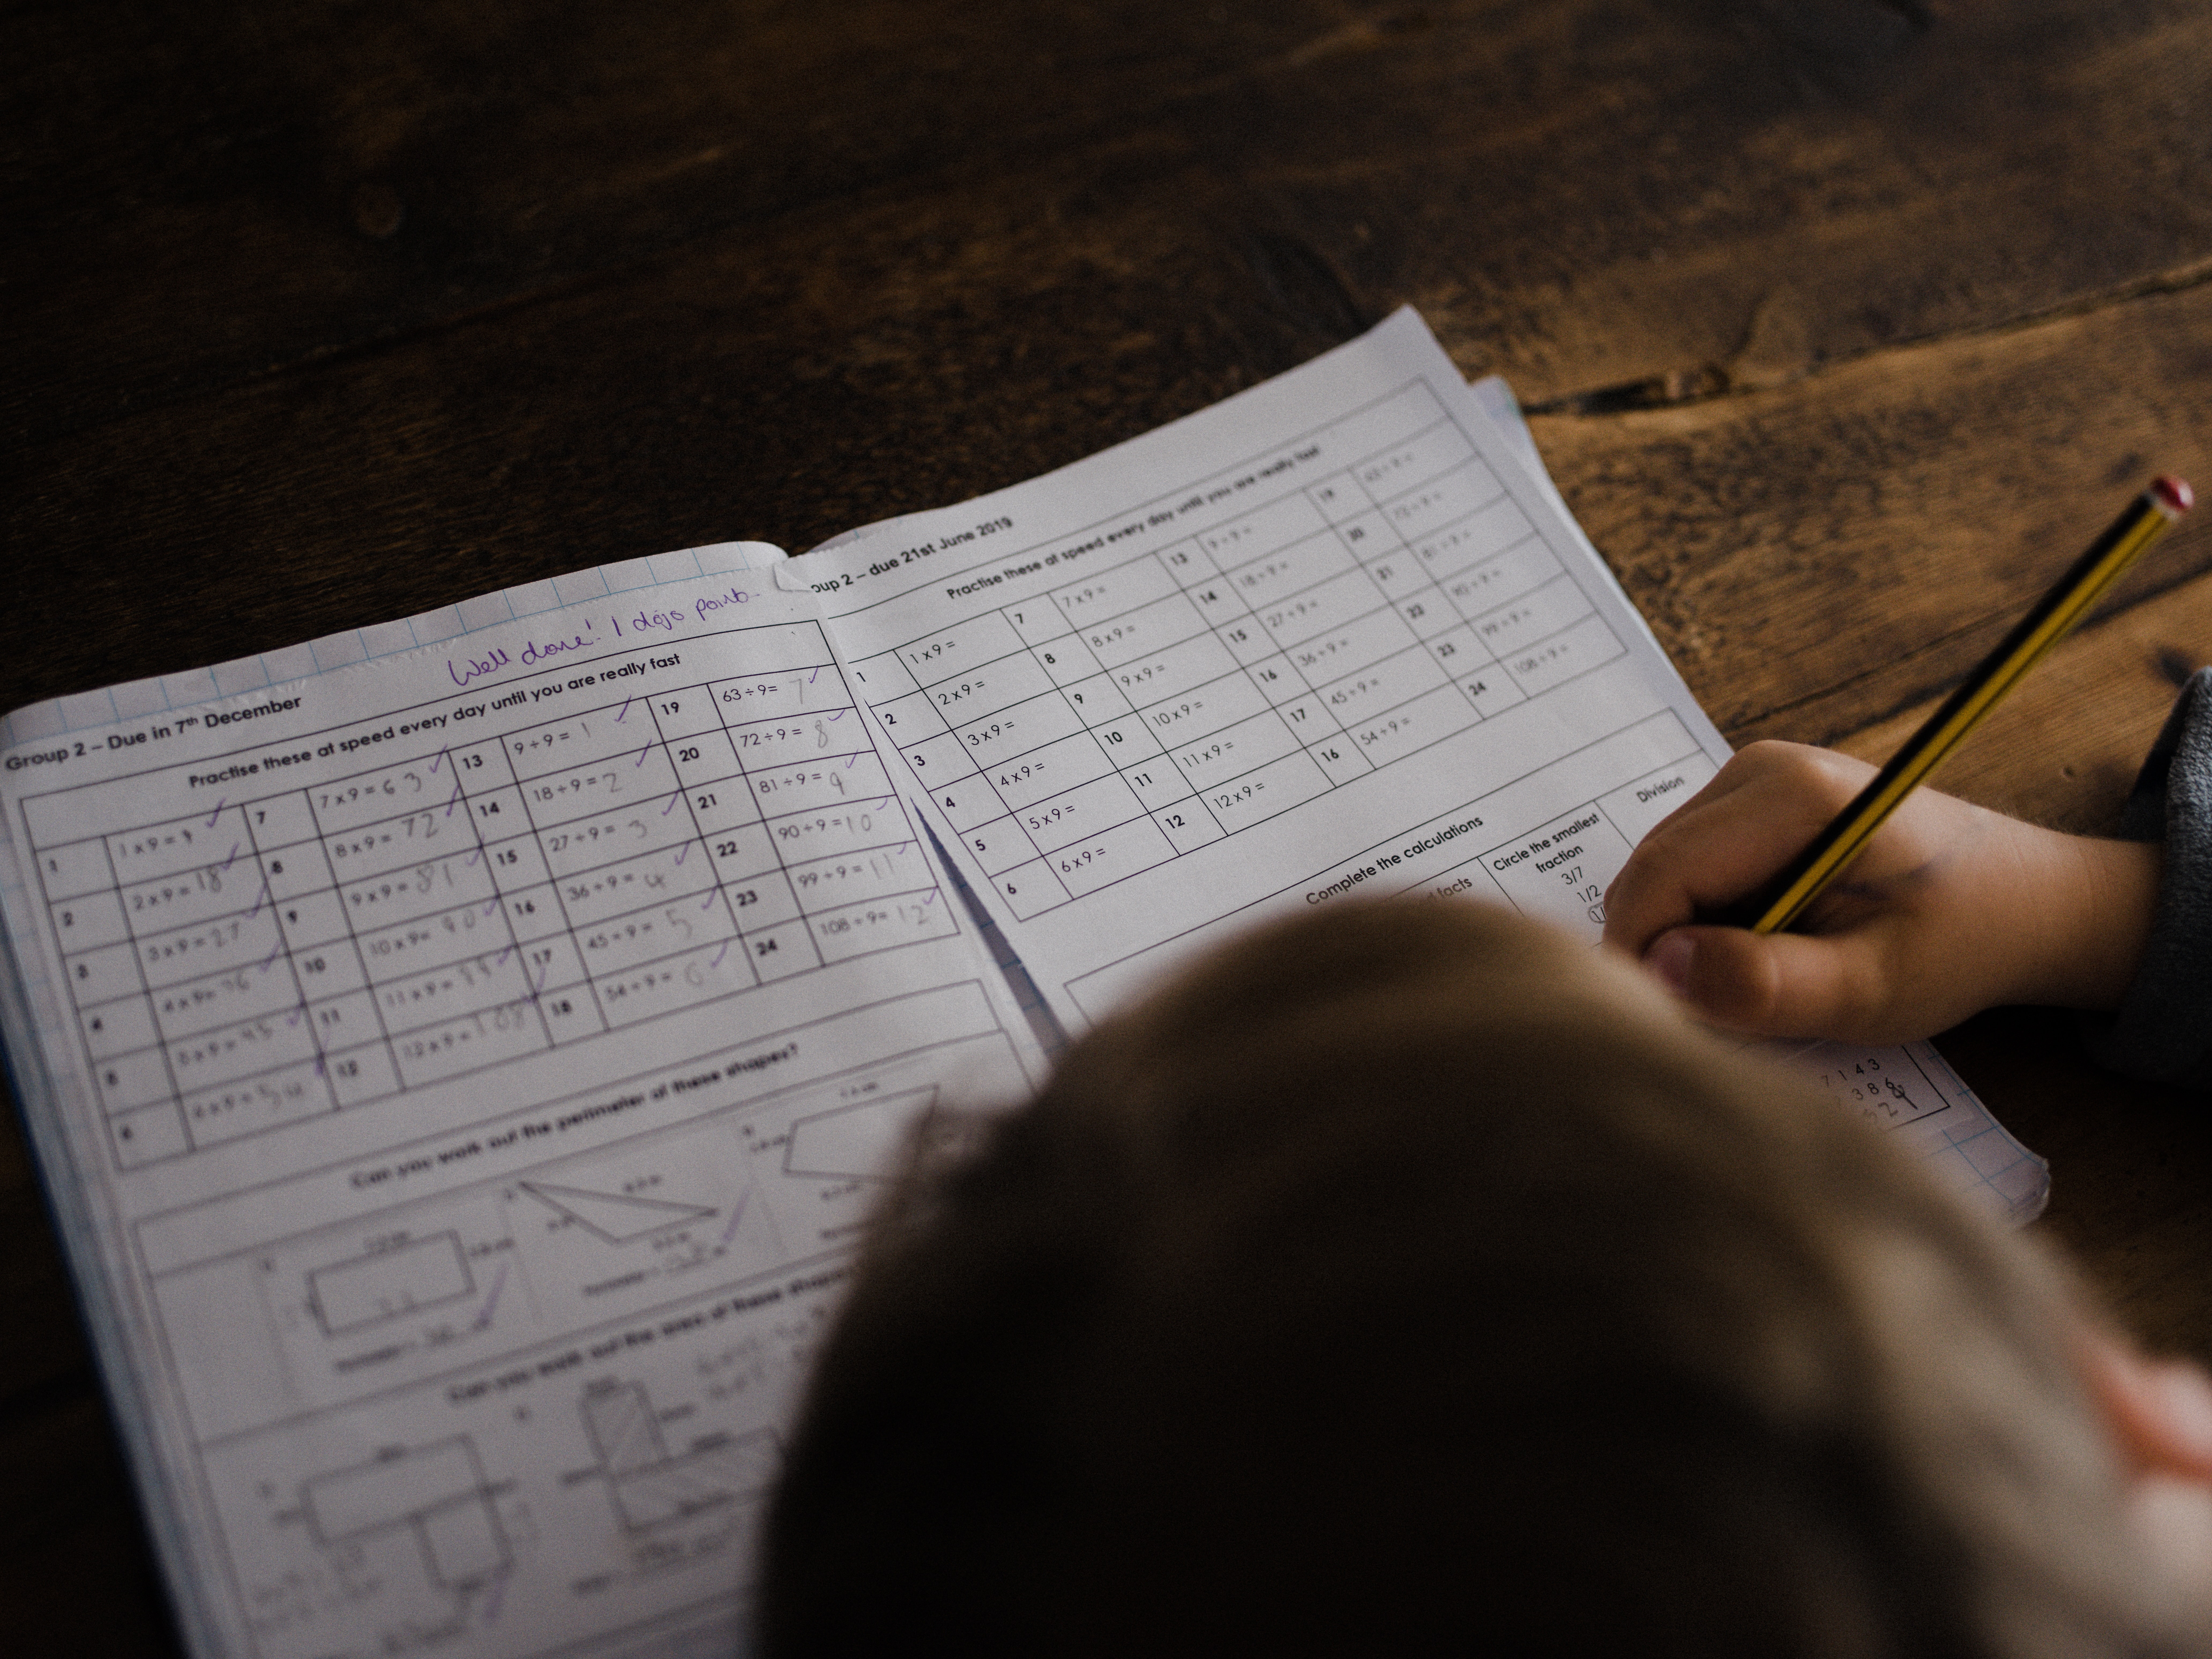 Exams are learning instruments too…   photo by Annie Spratt on Unsplash